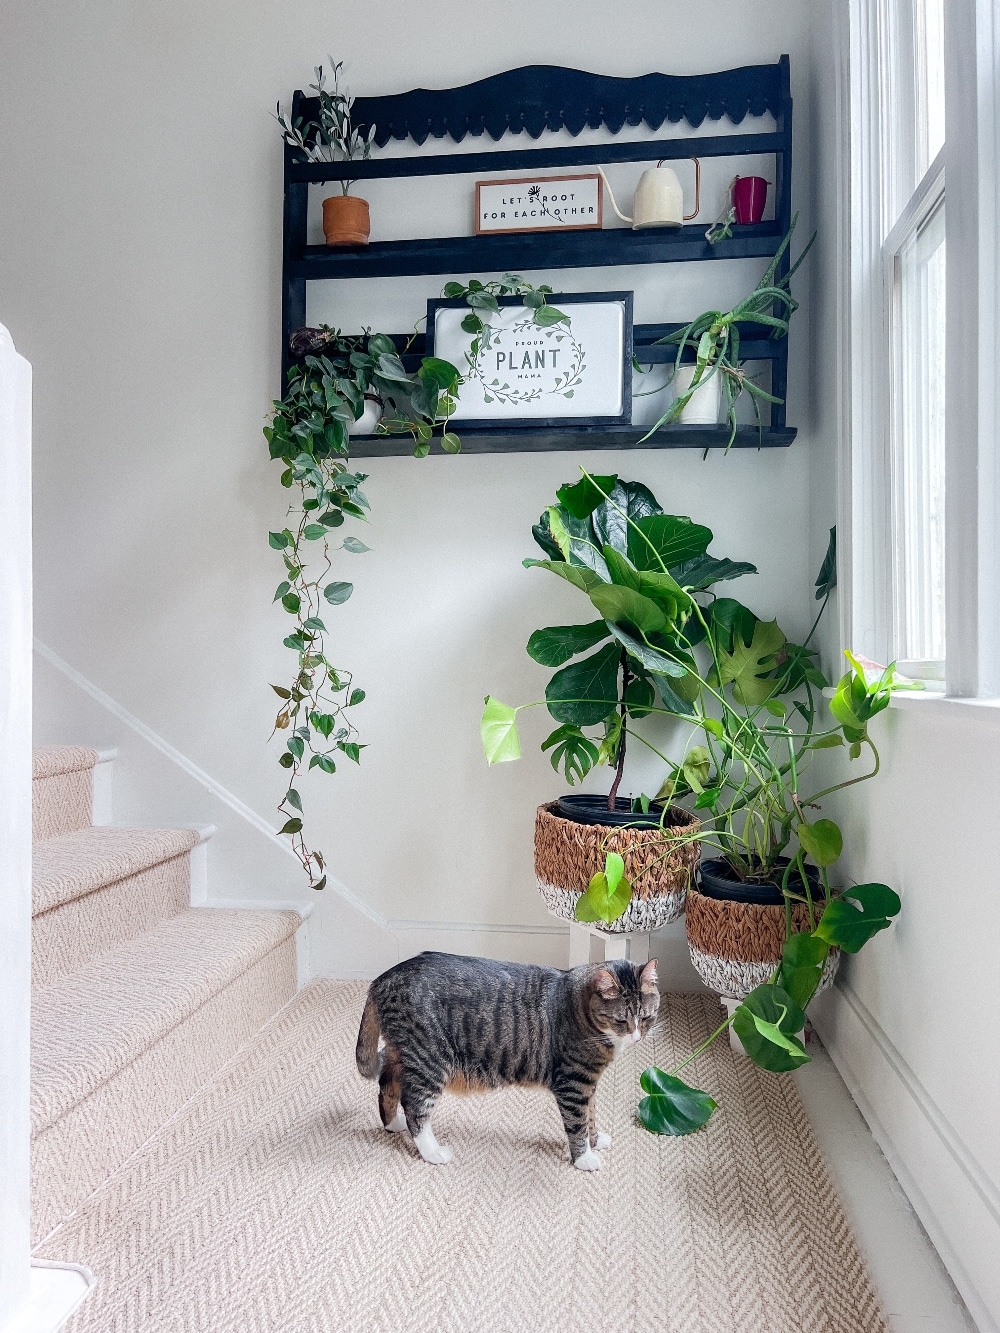 write a paragraph about our spiral staircase. We recently had a light tan and white runner put in which gives the staircase a summer feel. On the landing of the staircase I hung a vintage late rack with plants and plant signs. My plants love this sun-drenched spot. 